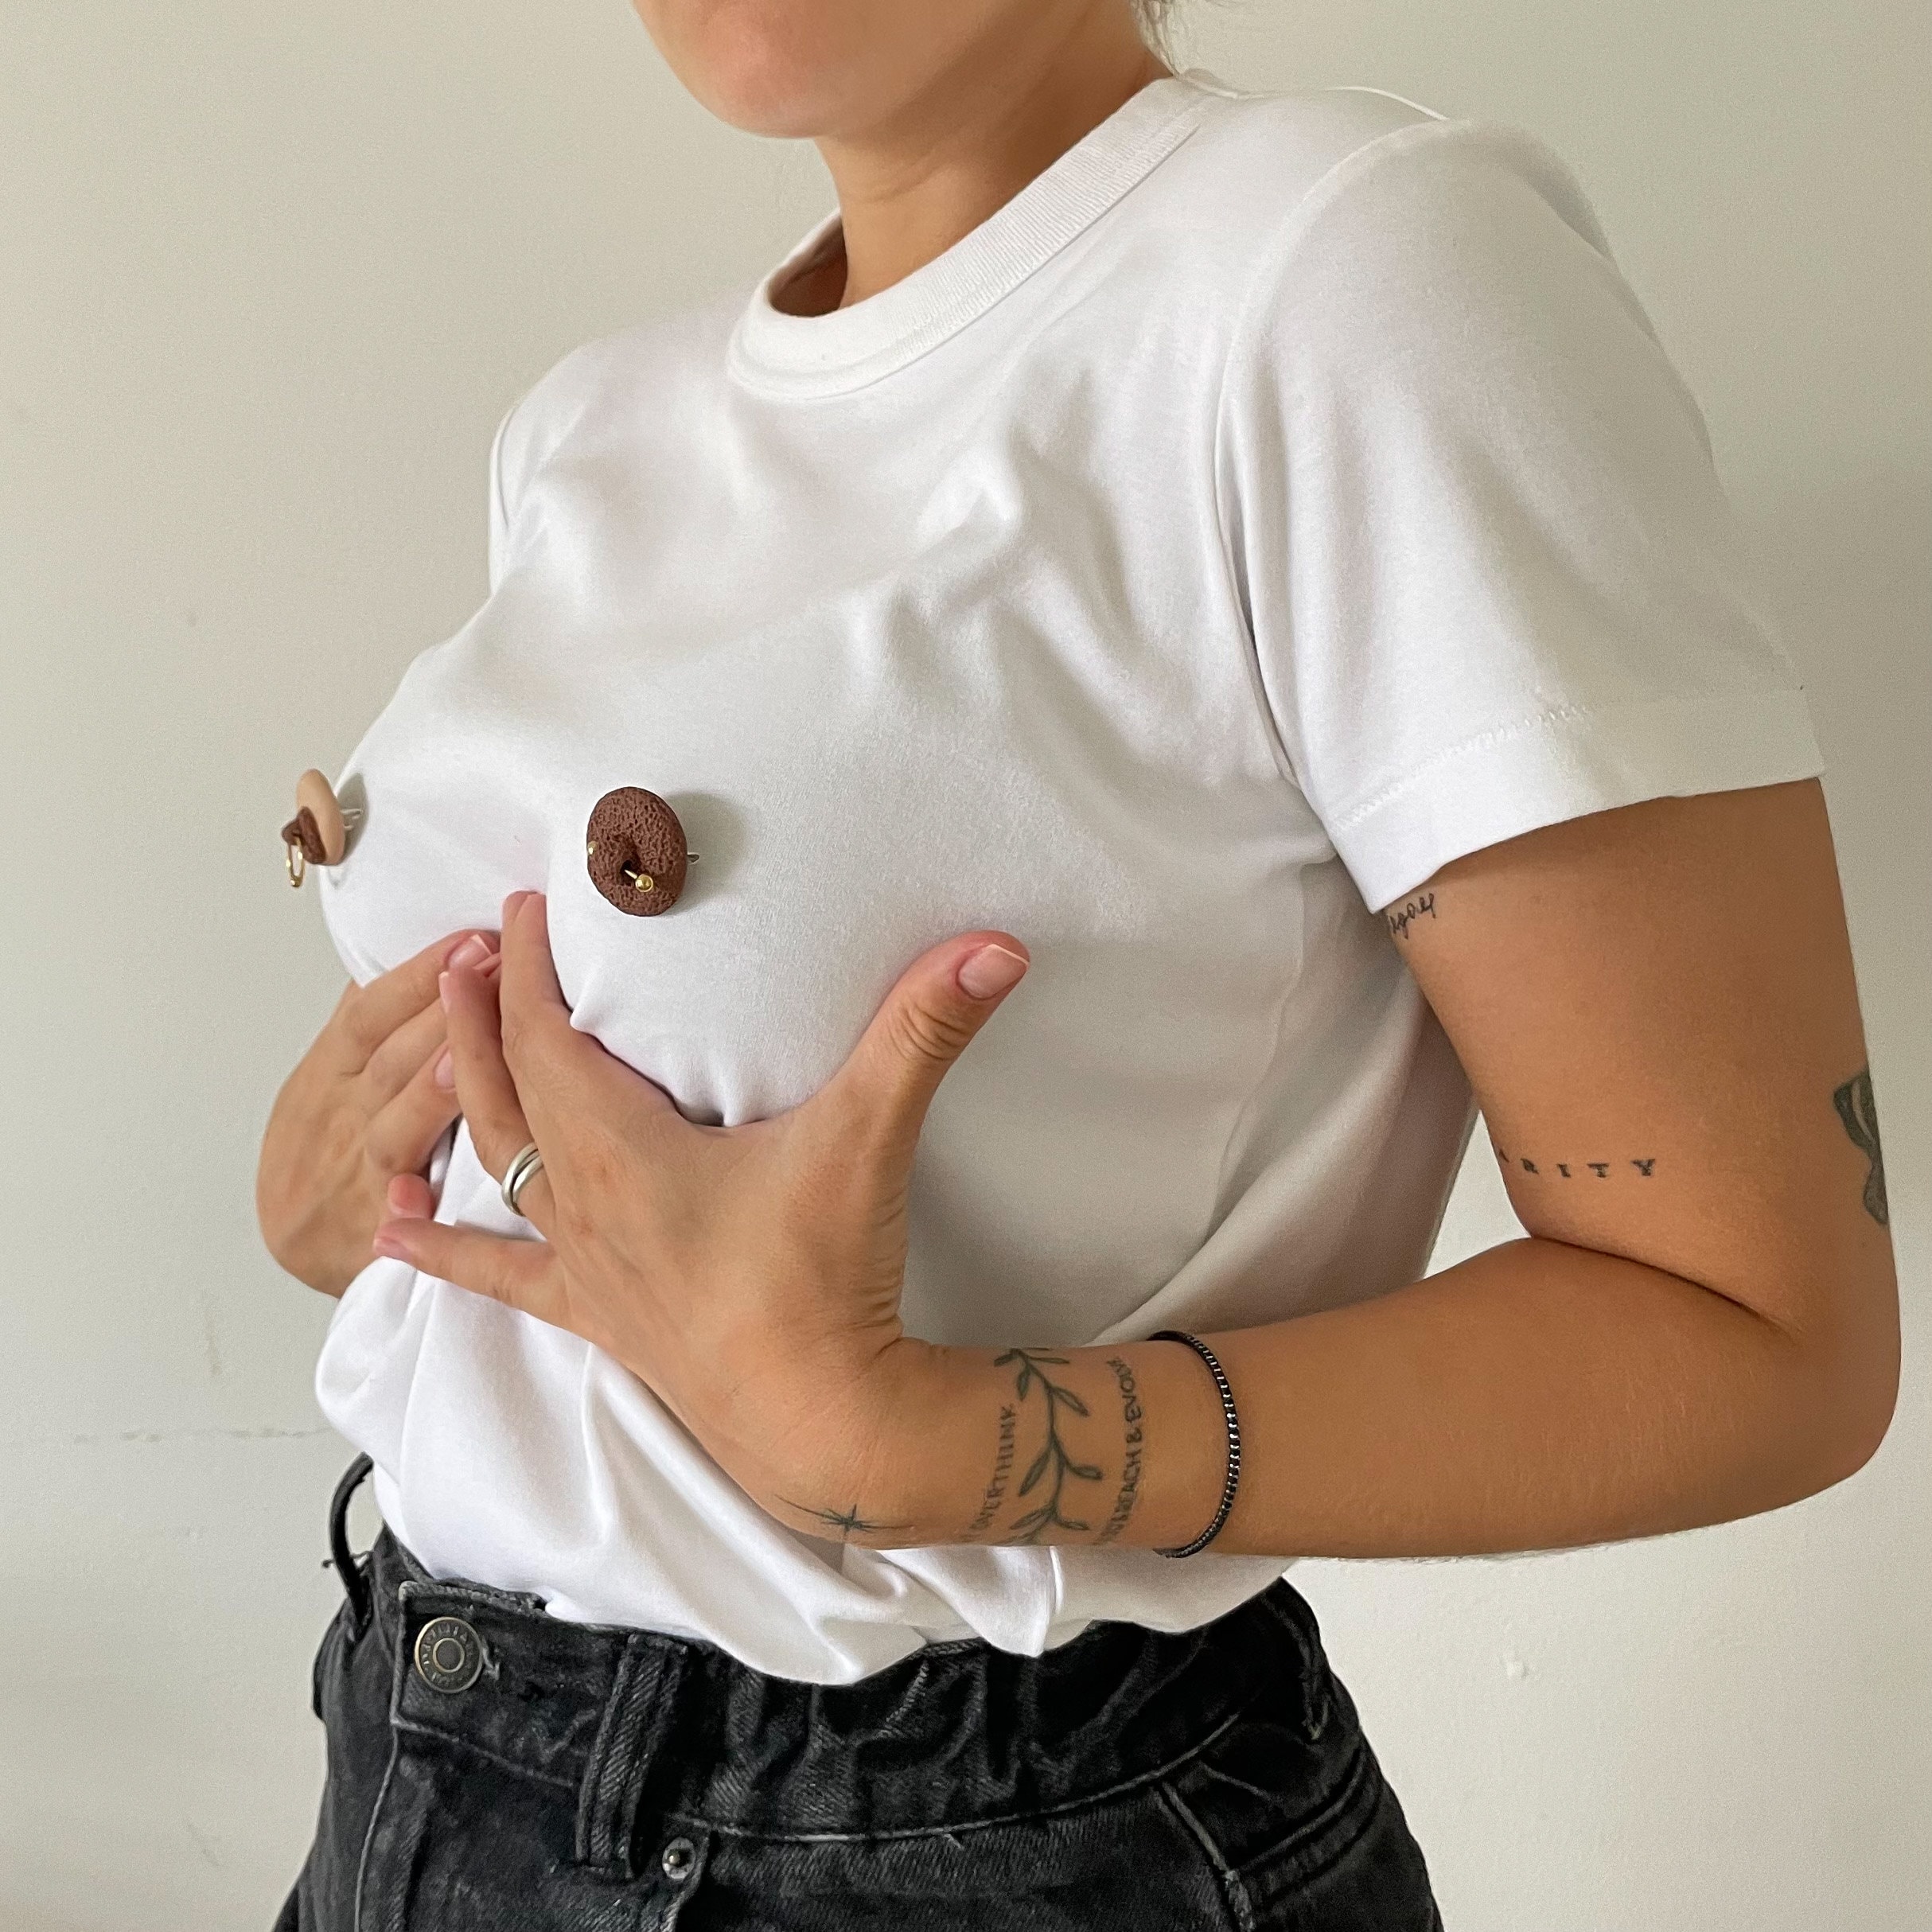 bun ty recommends nipple hole shirt pic